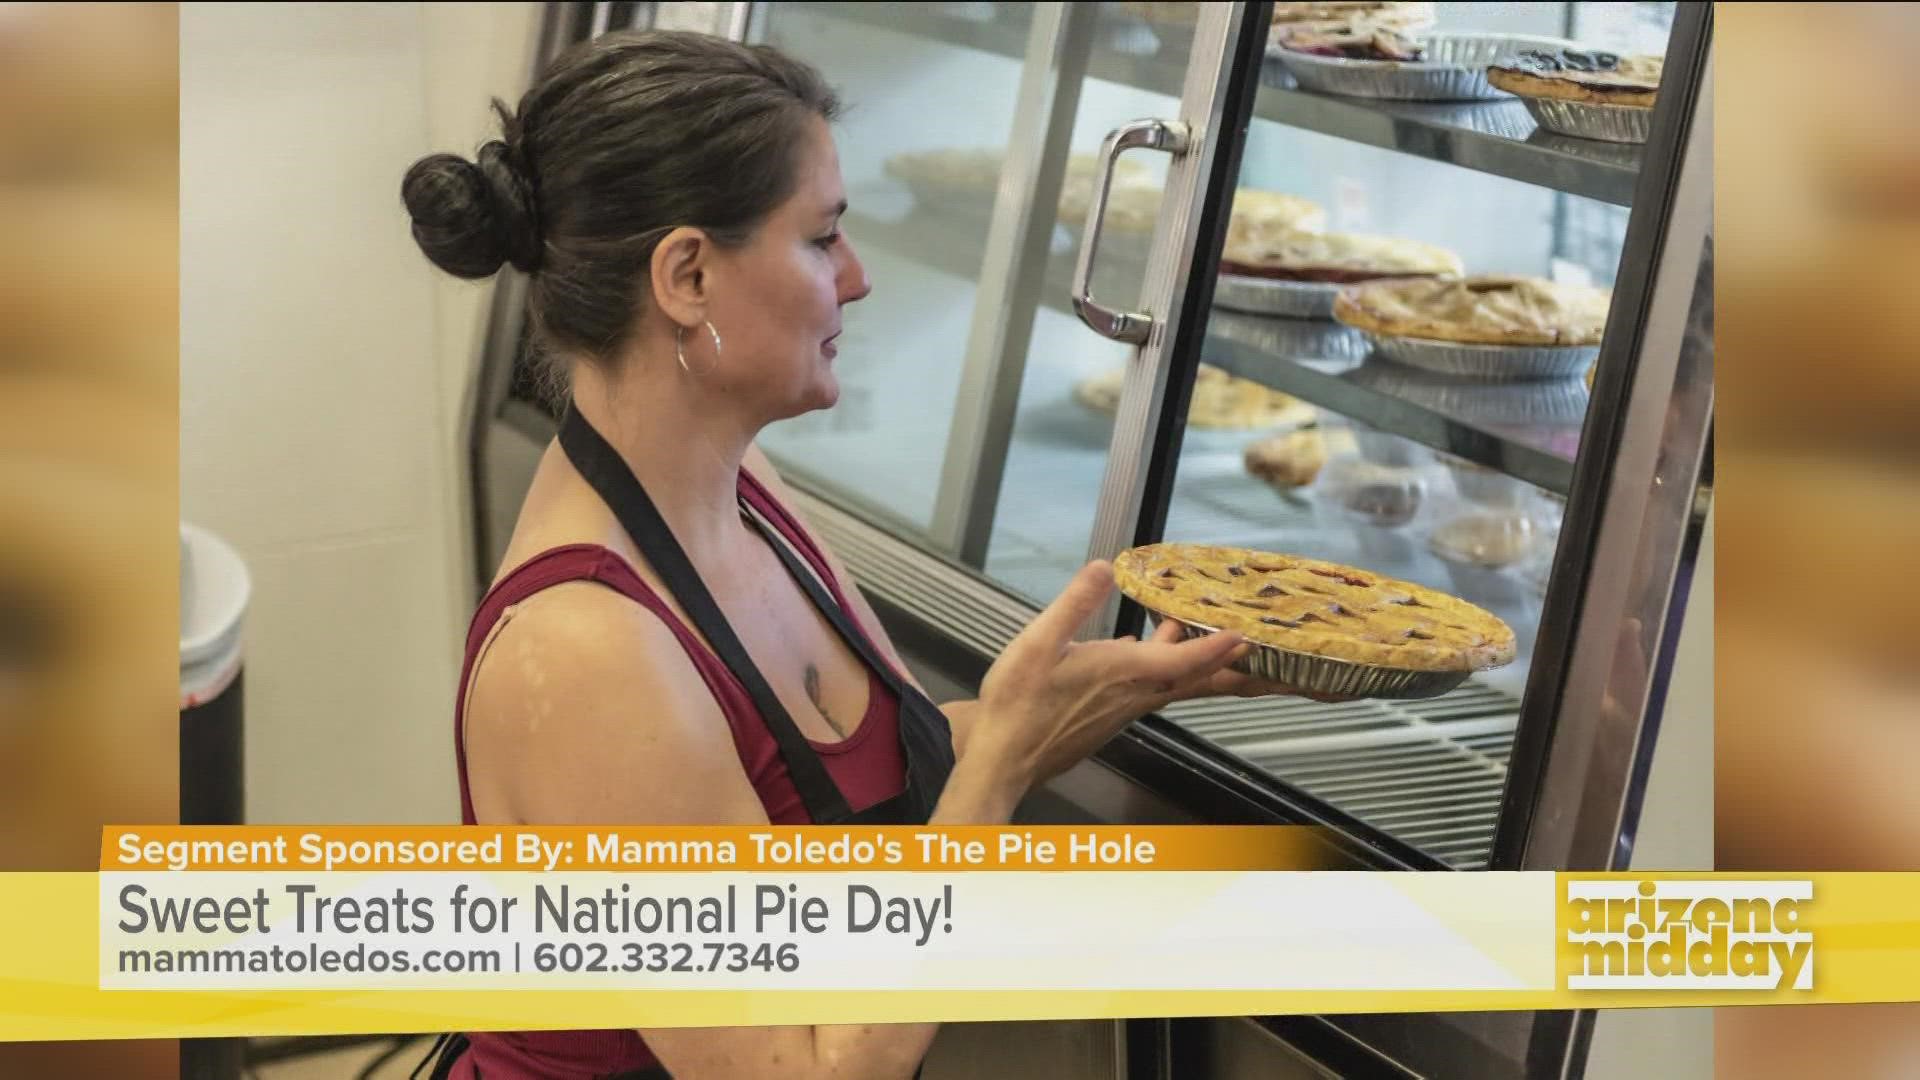 Whether it be savory or sweet, Tonya Saidi, owner of Mamma Toledo's The Pie Hole, says there is a pie flavor for everyone!